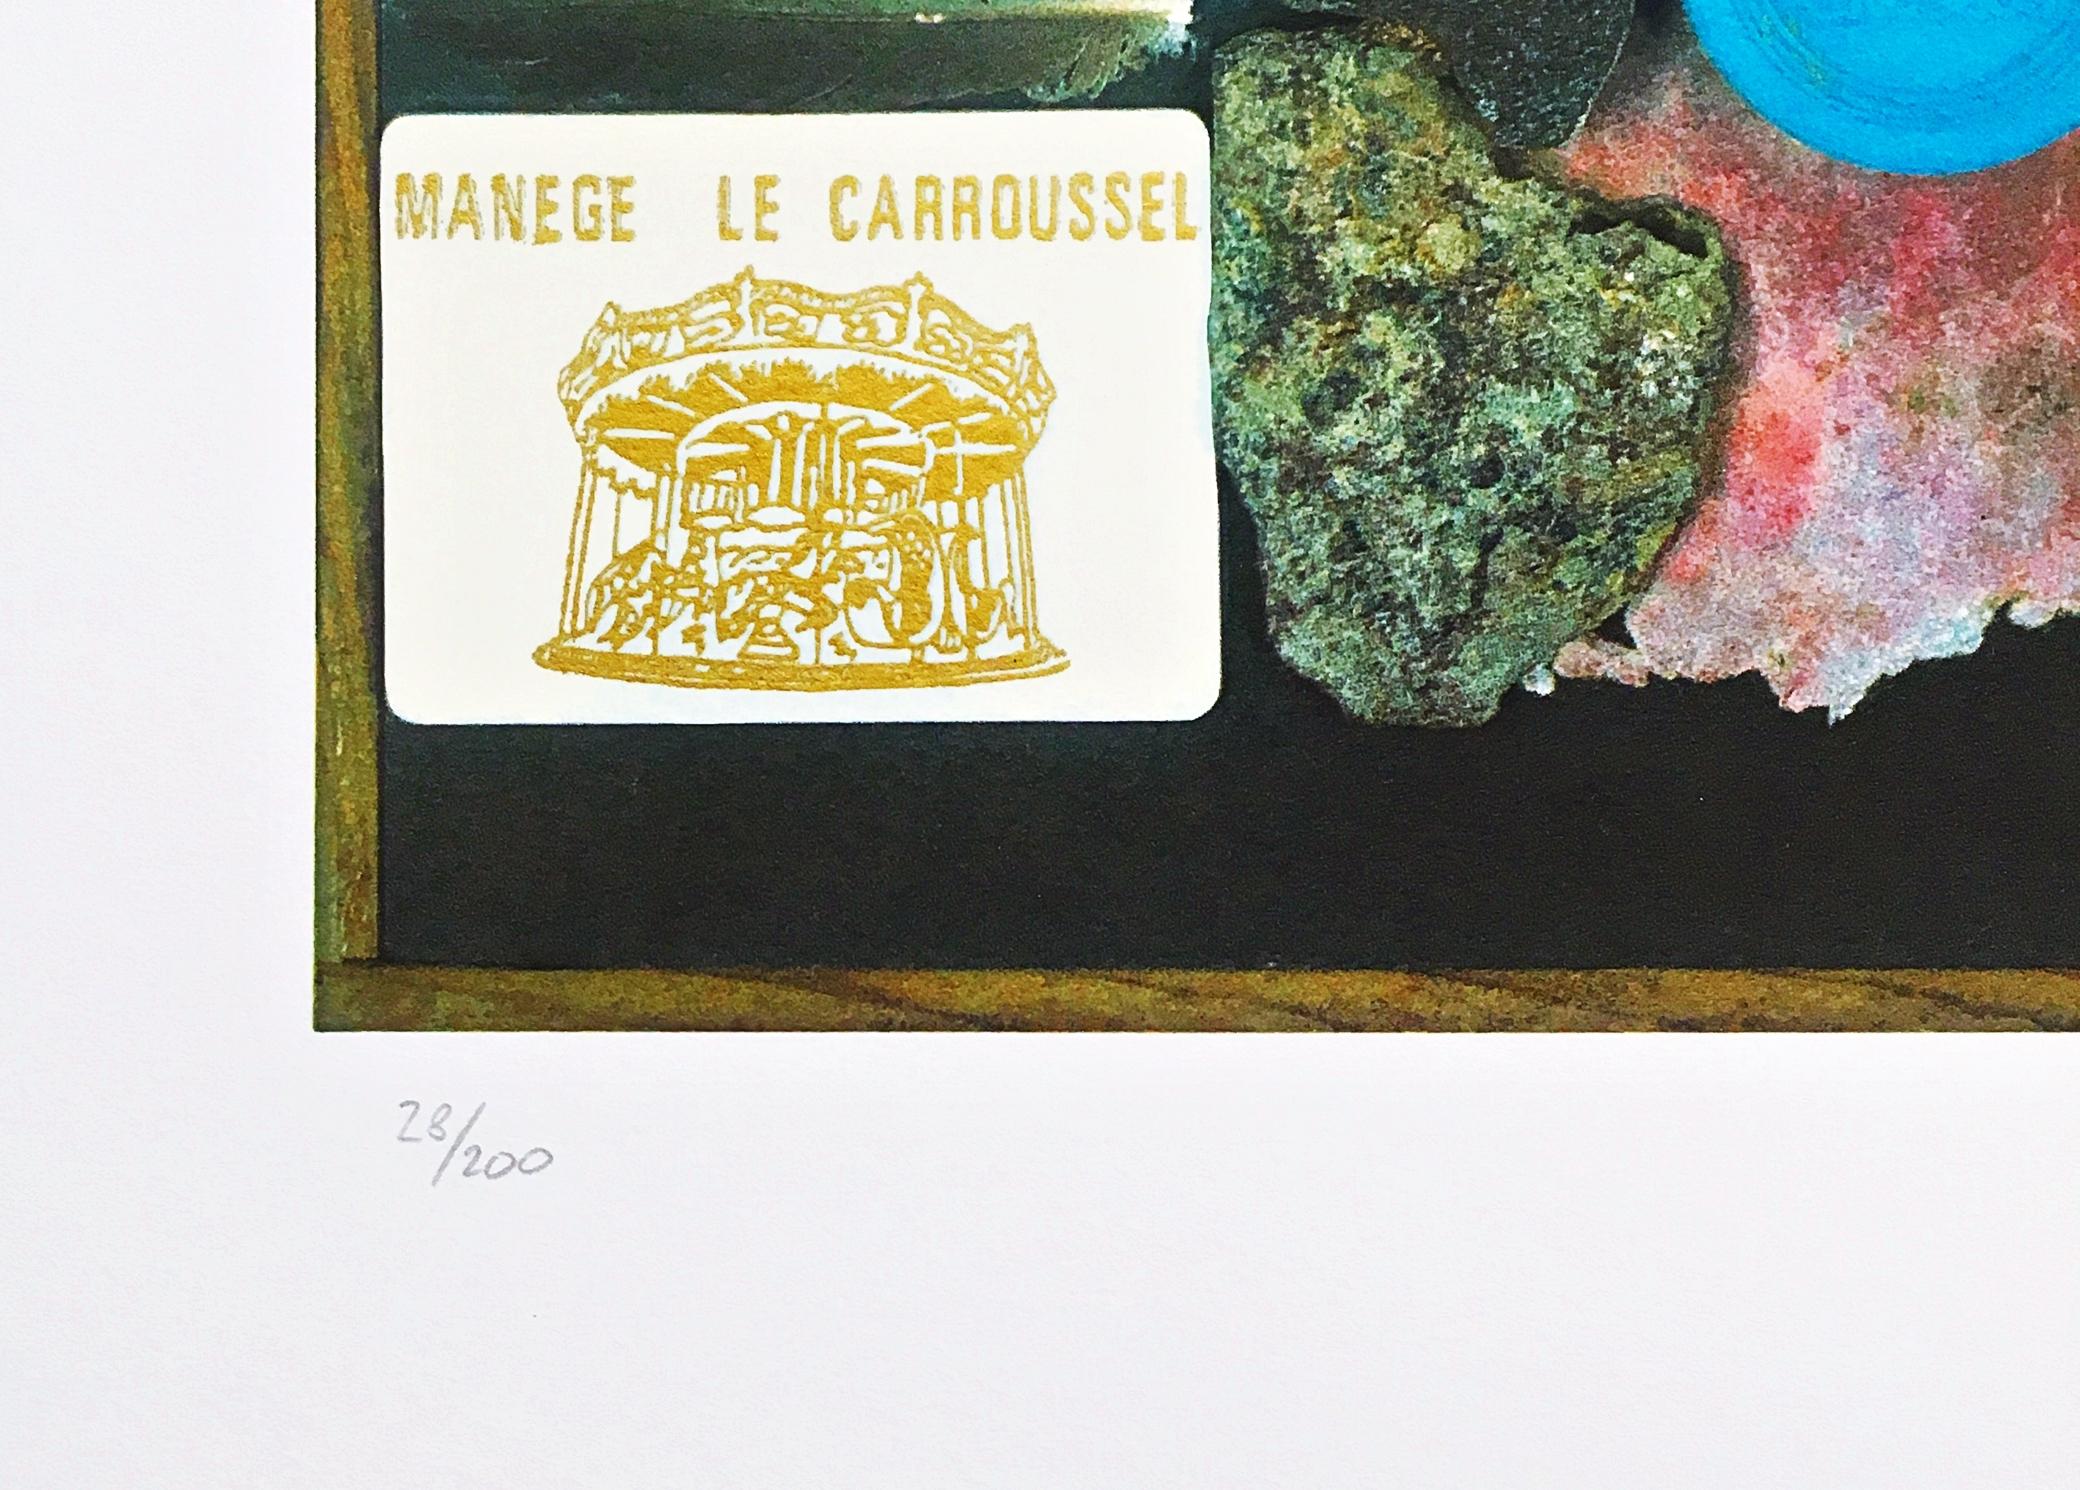 Peter Blake
A Walk in the Tuileries Gardens, 2004
26 colour Screenprint with Silver leaf and 3 Glazes
Hand signed and numbered 28/200 by artist on lower front
30 1/5 × 22 1/2 inches
Unframed
A Walk Through the Tuileries Gardens is based on a memory